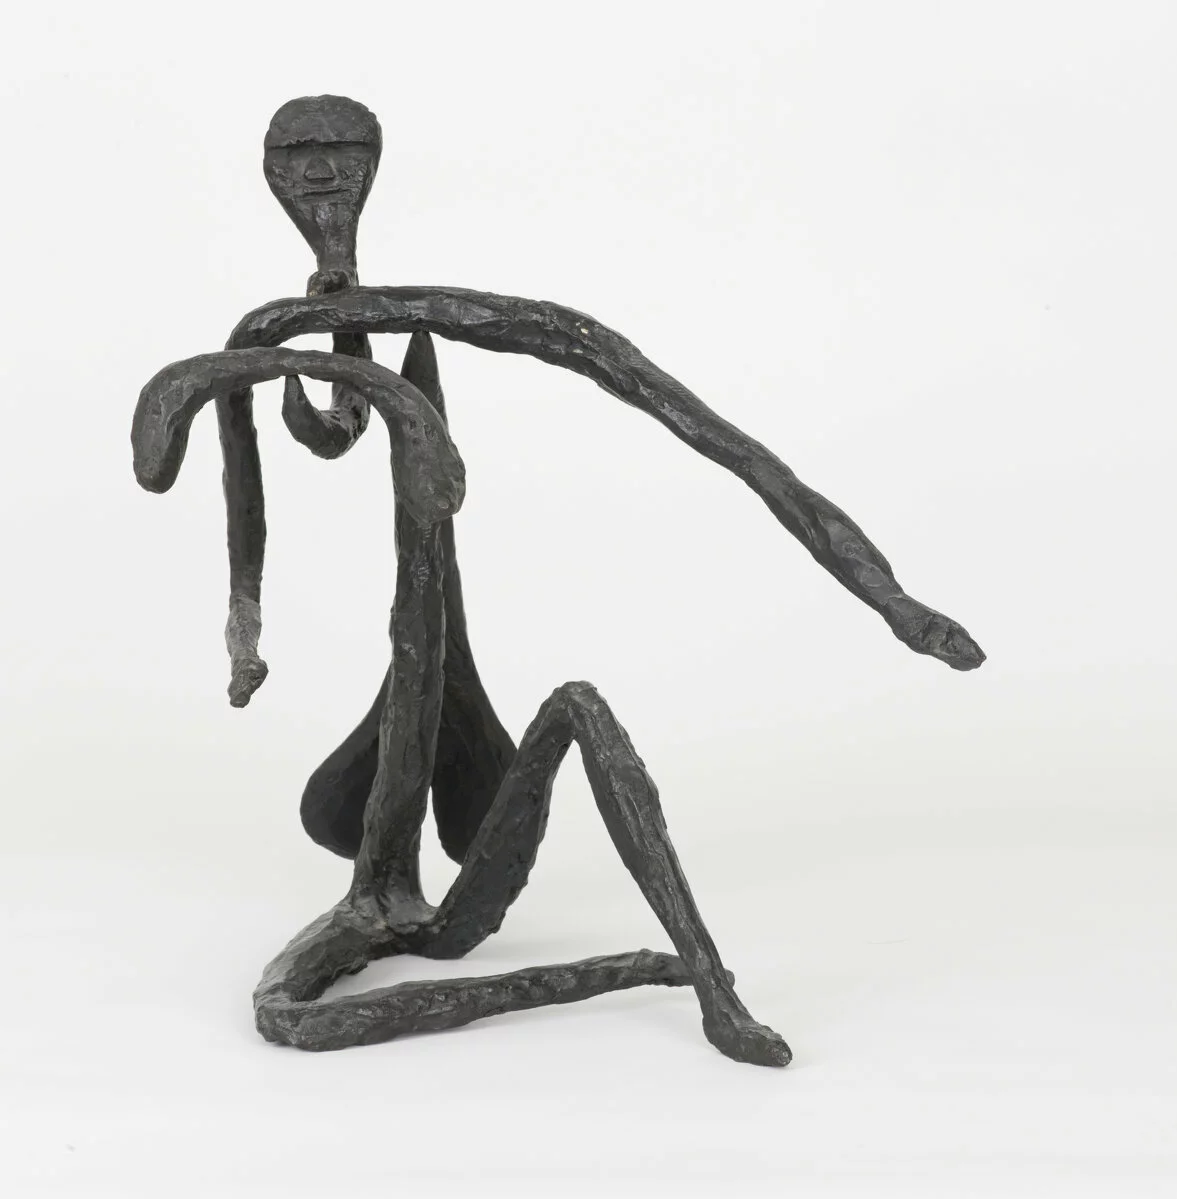 Alexander Calder (b. 1898, Lawton, PA; d. 1976, New York, NY), A Detached Person, 1944/1969. Collection Museum of Contemporary Art Chicago, The Leonard and Ruth Horwich Family Loan, EL1995.5

© 2022 Calder Foundation, New York/Artists Rights Society (ARS), New York
Photo: Nathan Keay, © MCA Chicago
 2022/06/EL1995_5.jpg 